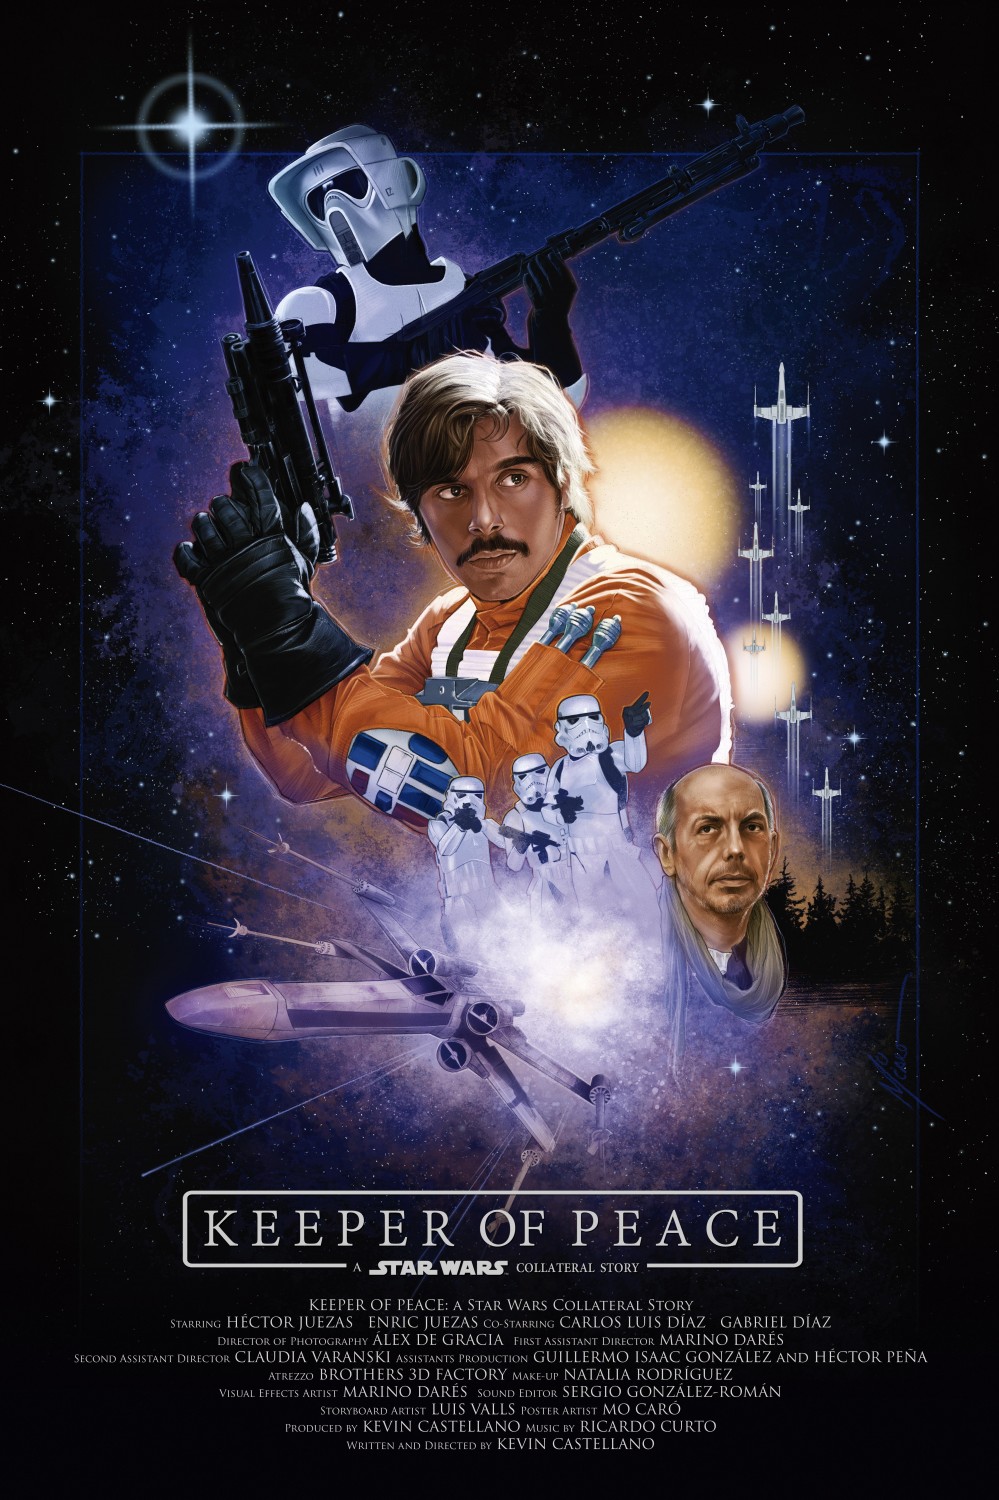 Extra Large Movie Poster Image for Keeper of Peace: A Star Wars Collateral Story